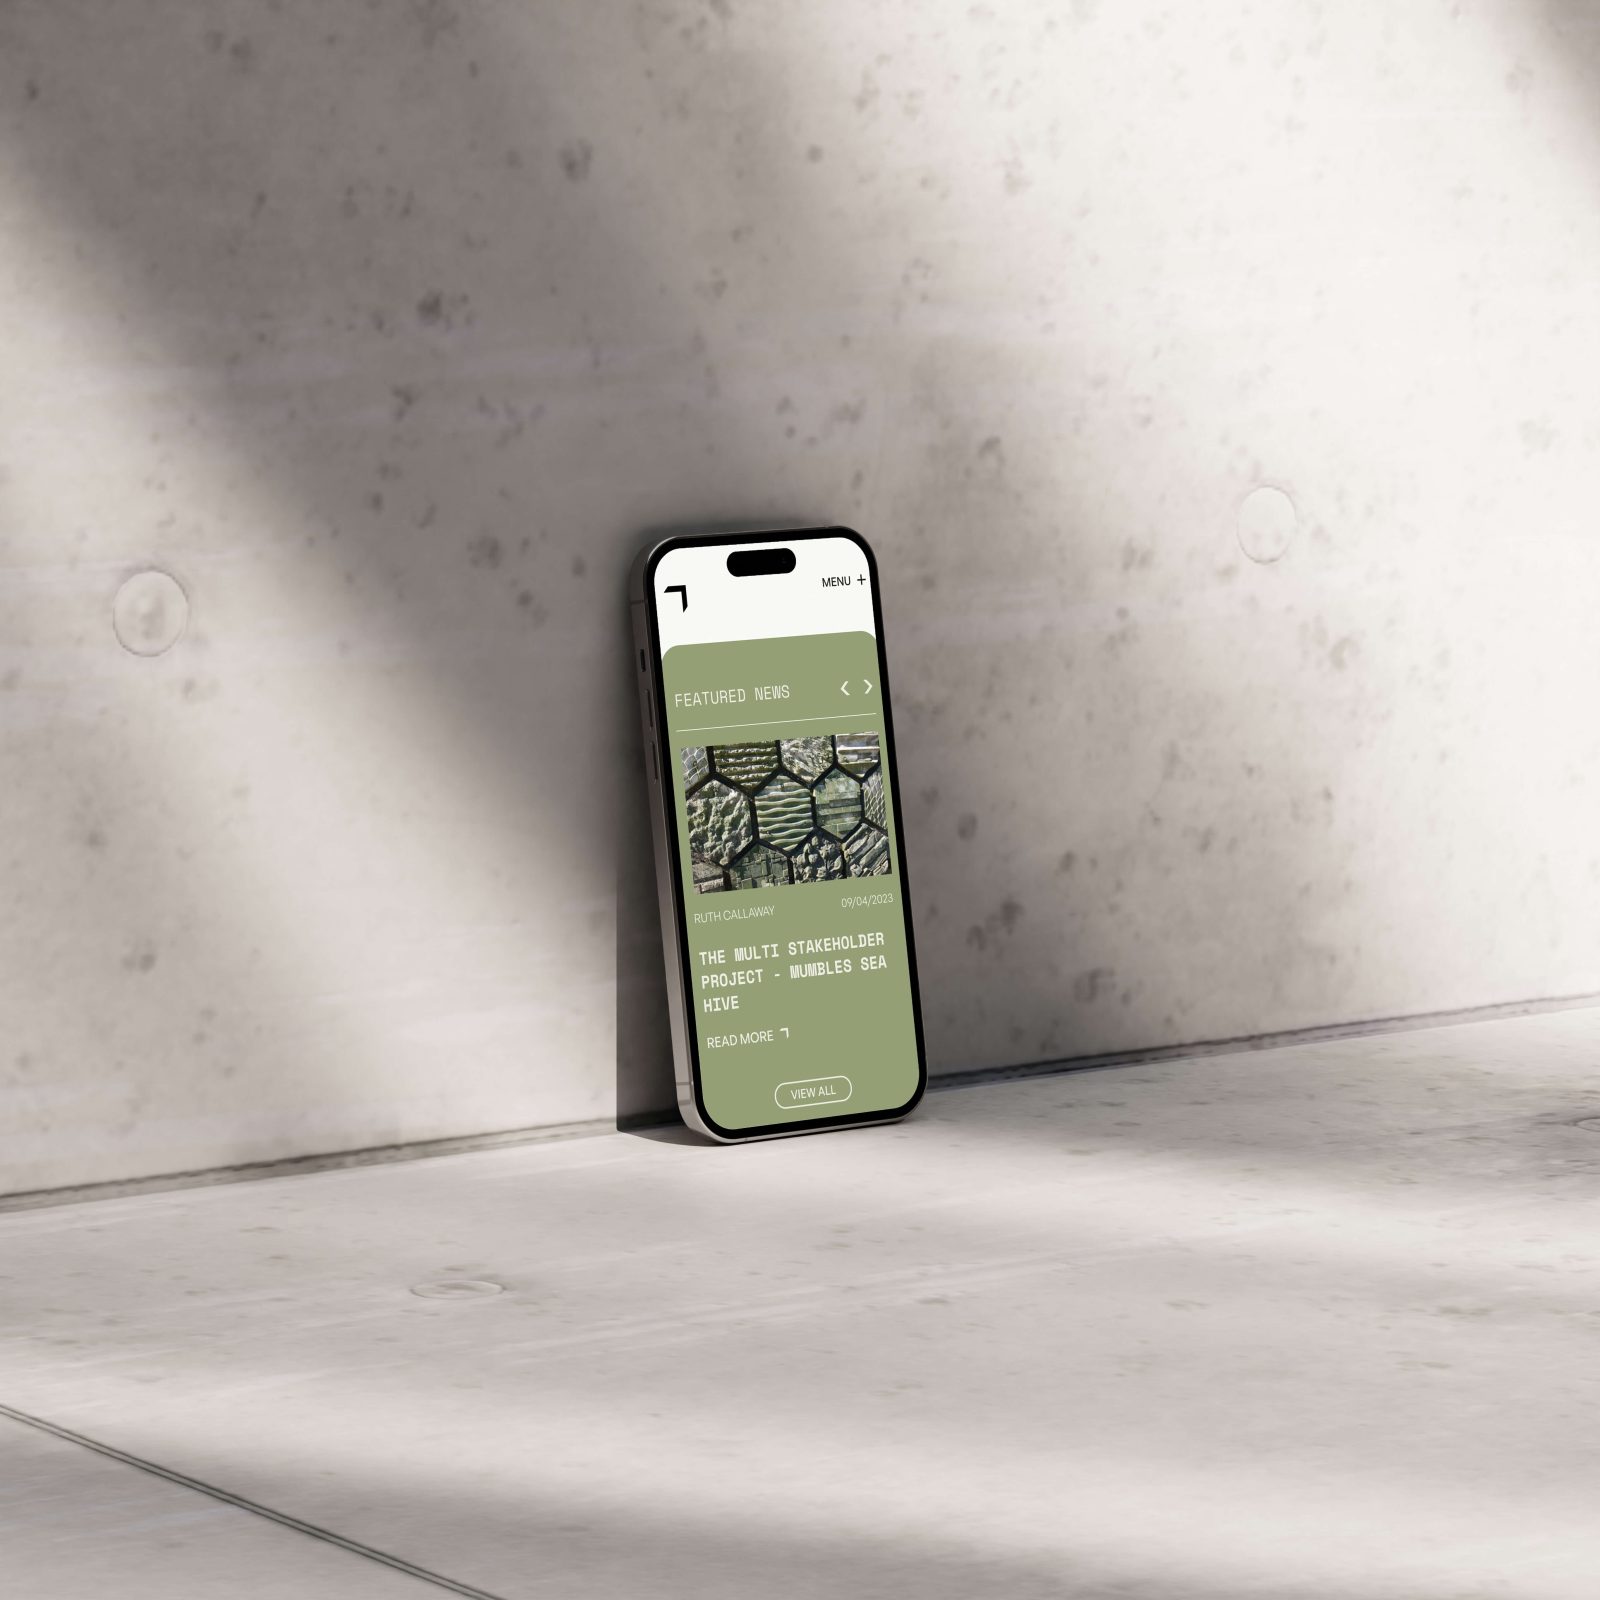 A smartphone displaying a website design by a web agency in Bristol, featuring sunglasses stands upright against a textured light grey wall in a bright environment.